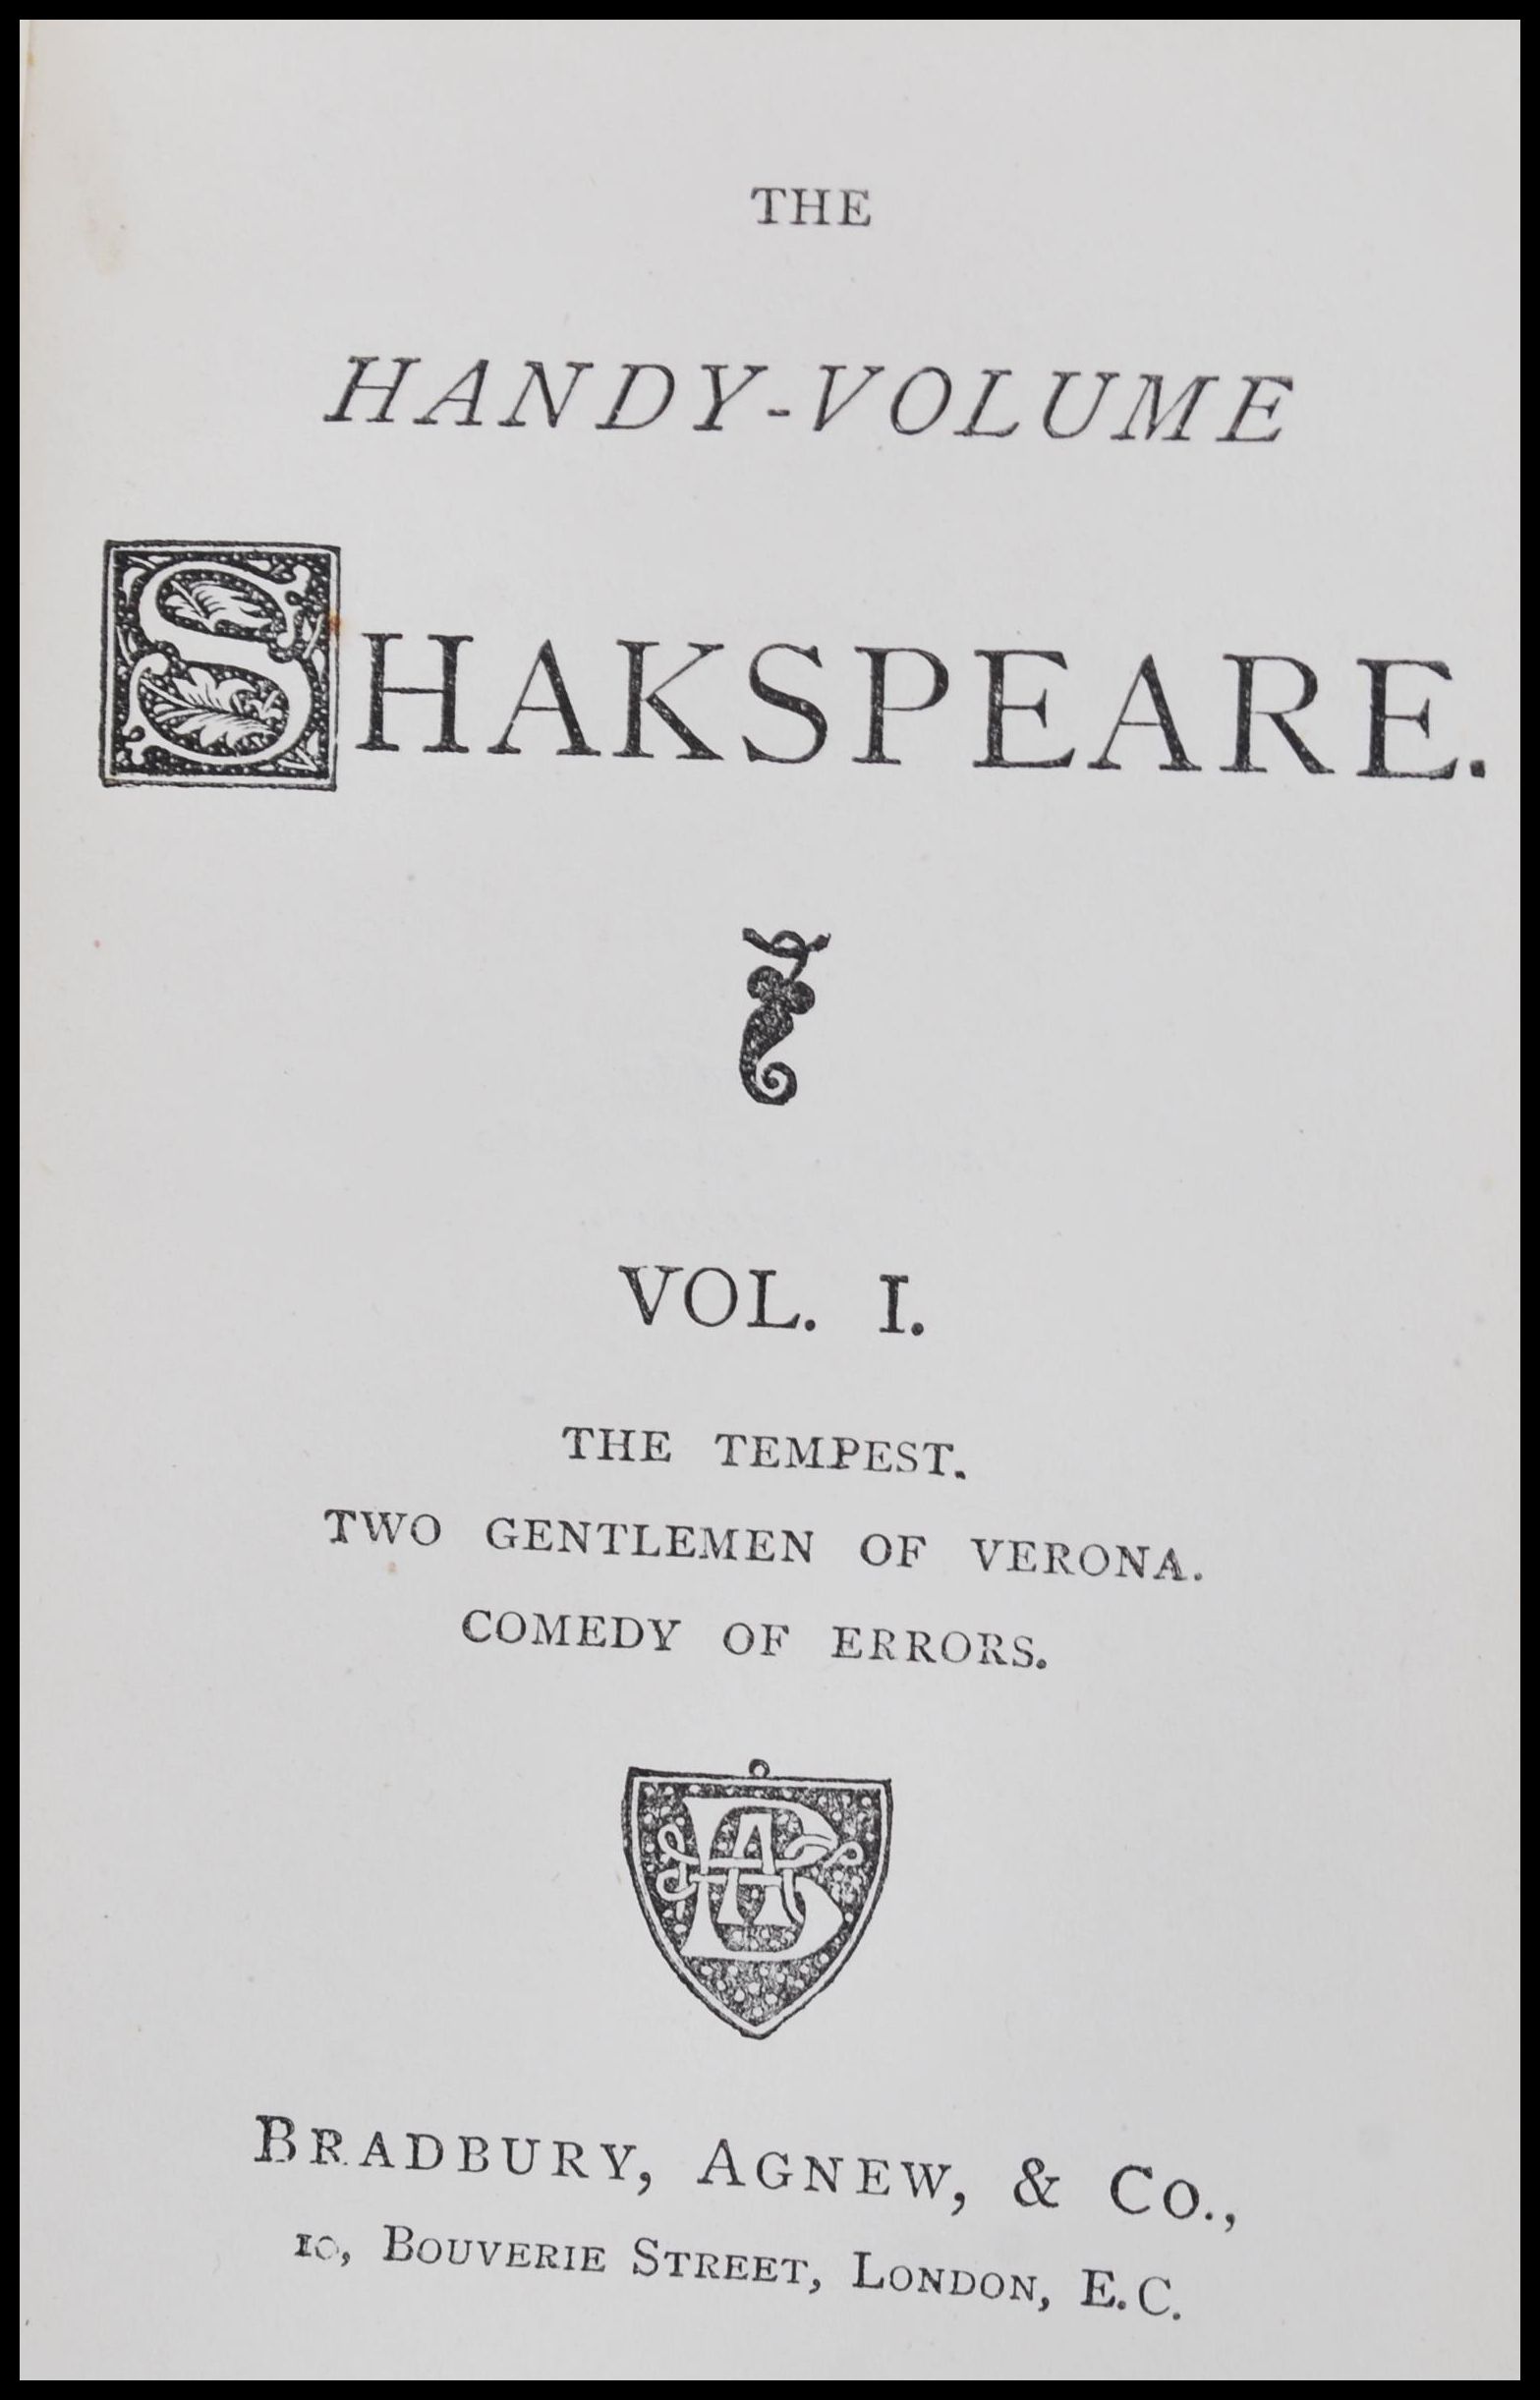 A set of late 19th Century play books by William Shakespeare in sleeve ' the Handy Volume Shakspeare - Image 3 of 4